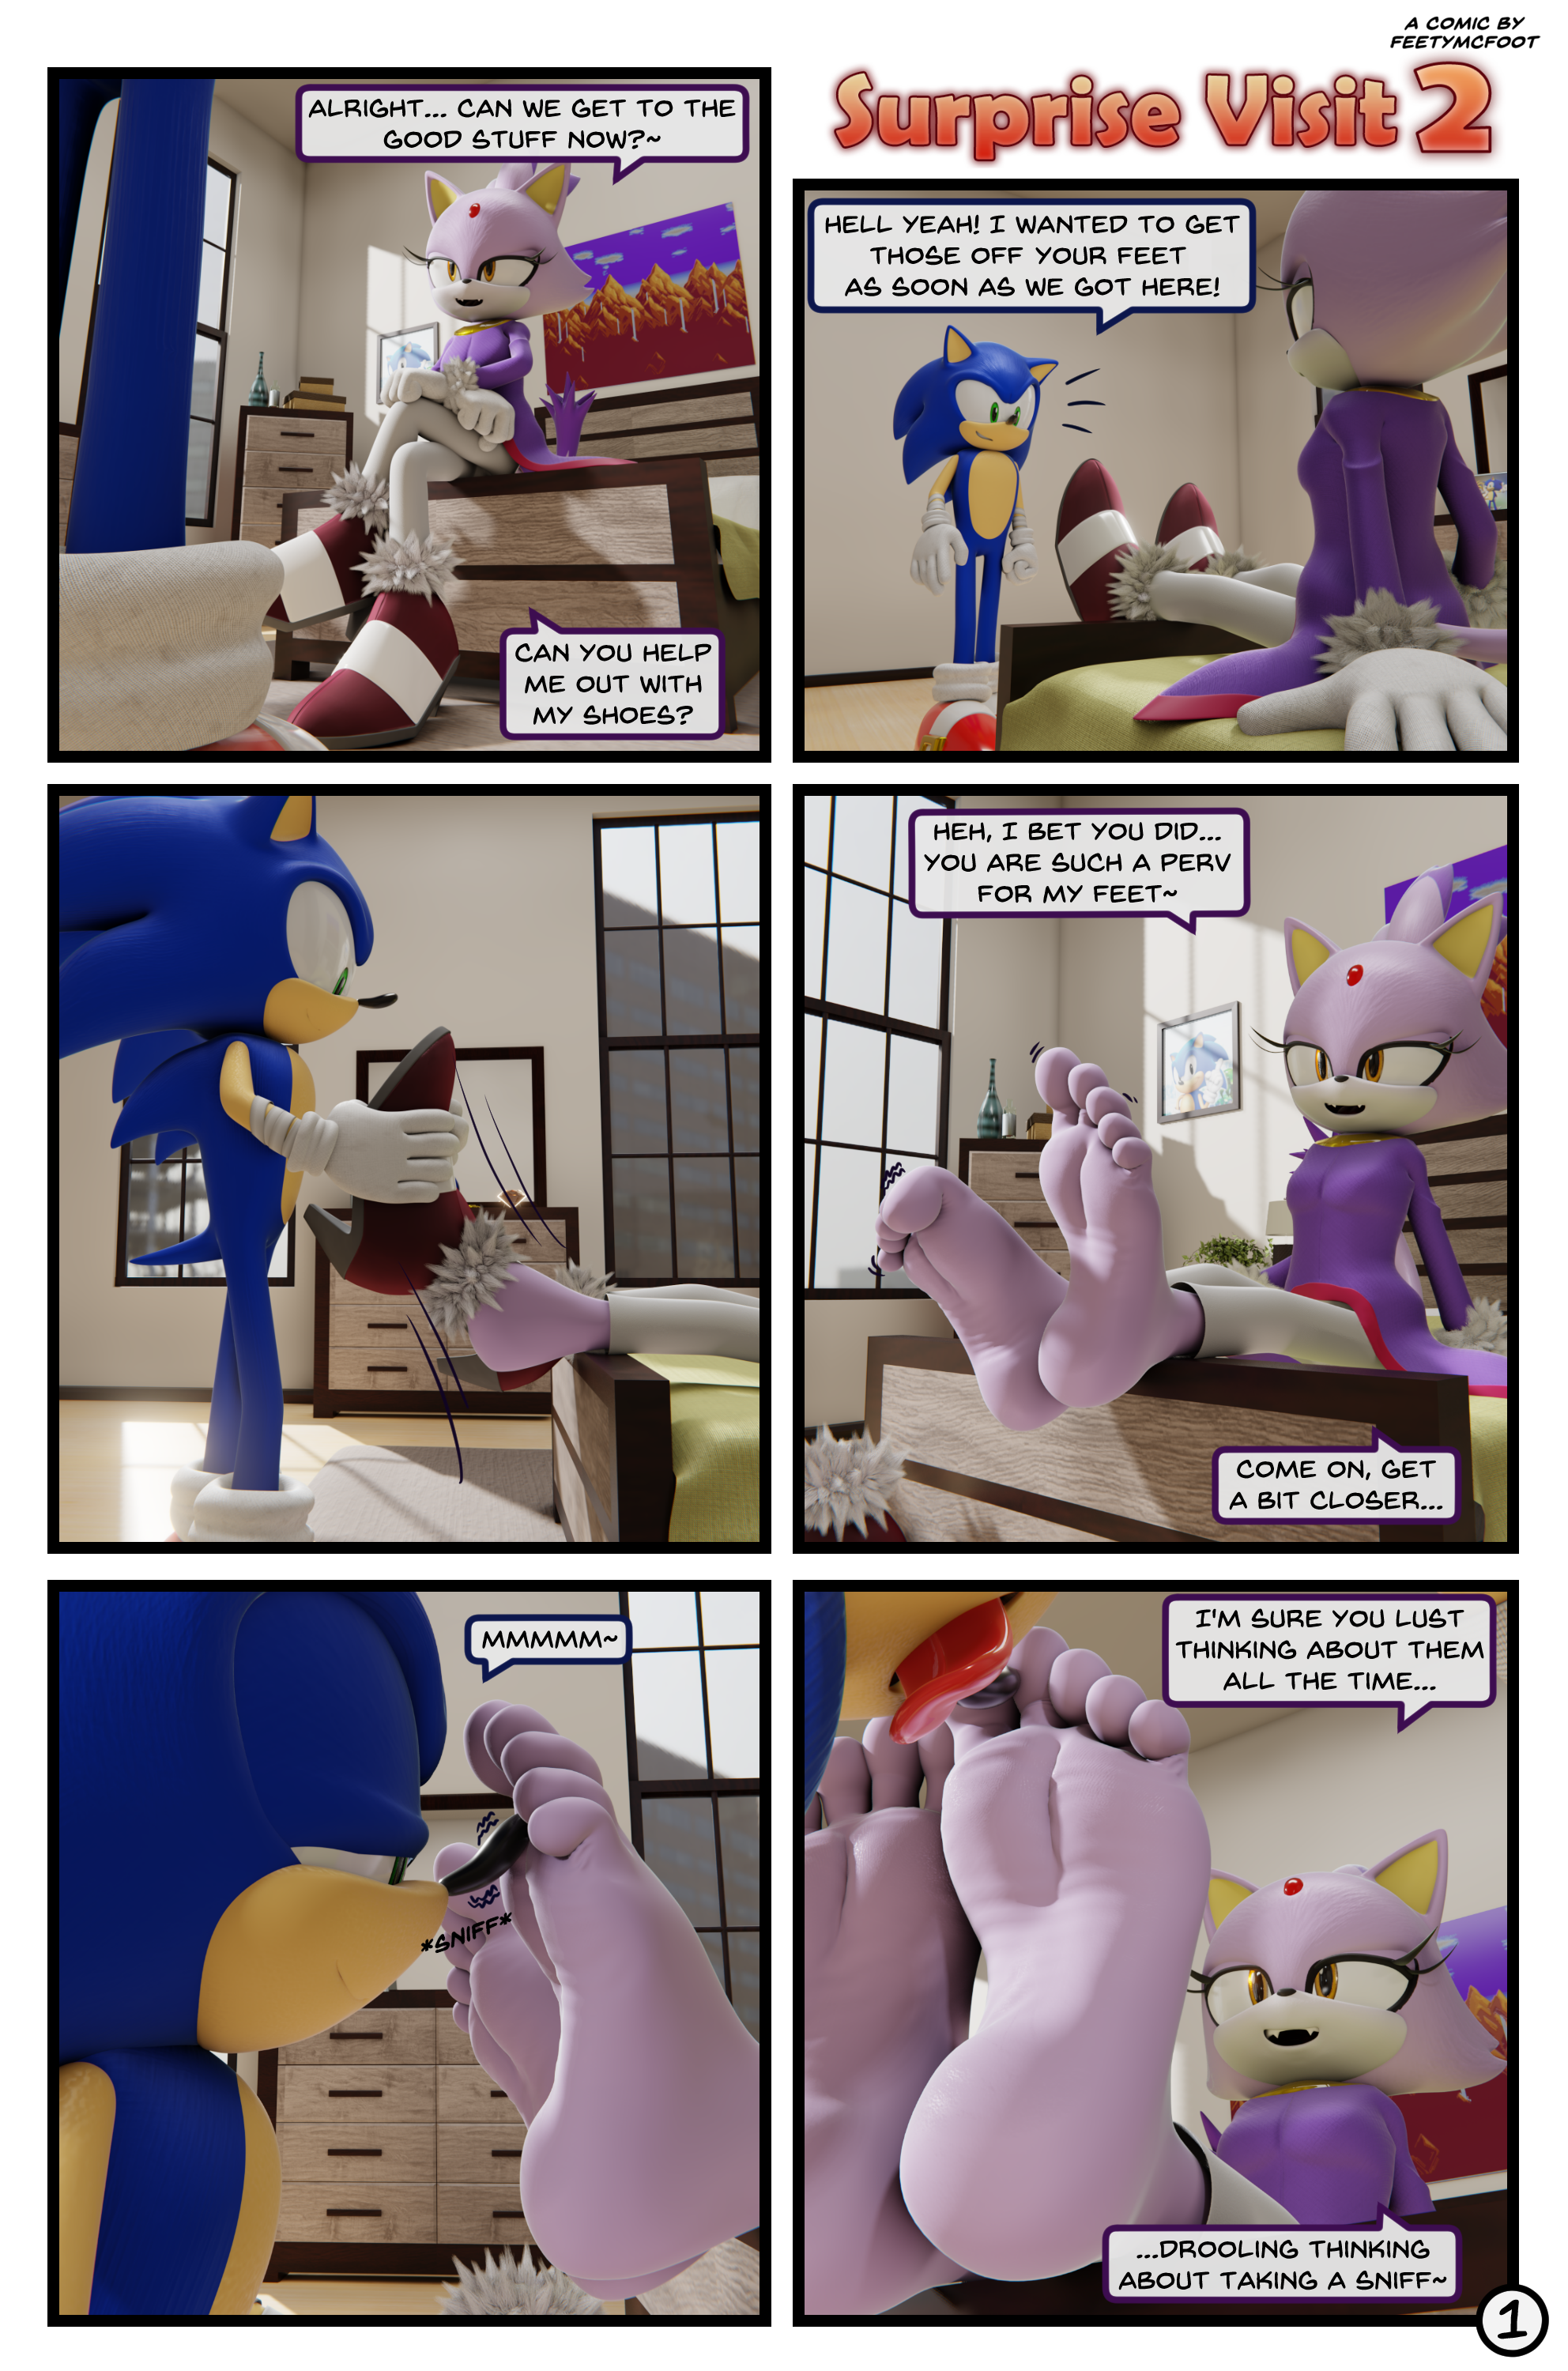 Surprise Visit 2 - Page 1 by FeetyMcFoot -- Fur Affinity [dot] net